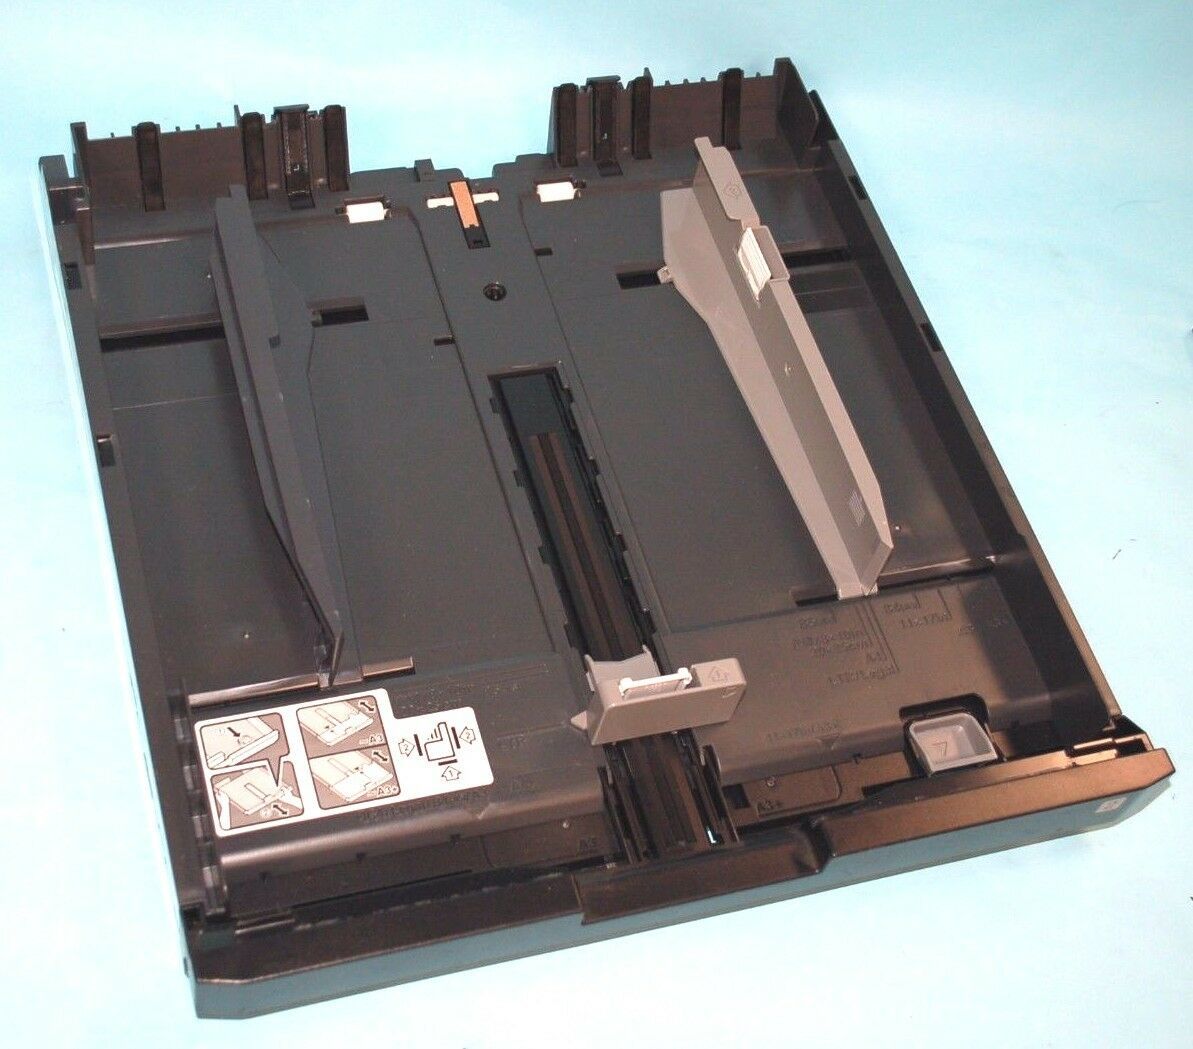 Epson Workforce Wf 7010 Lower Paper Loading Cassette Tray 2 Wf 7620 Feeders And Trays 3406